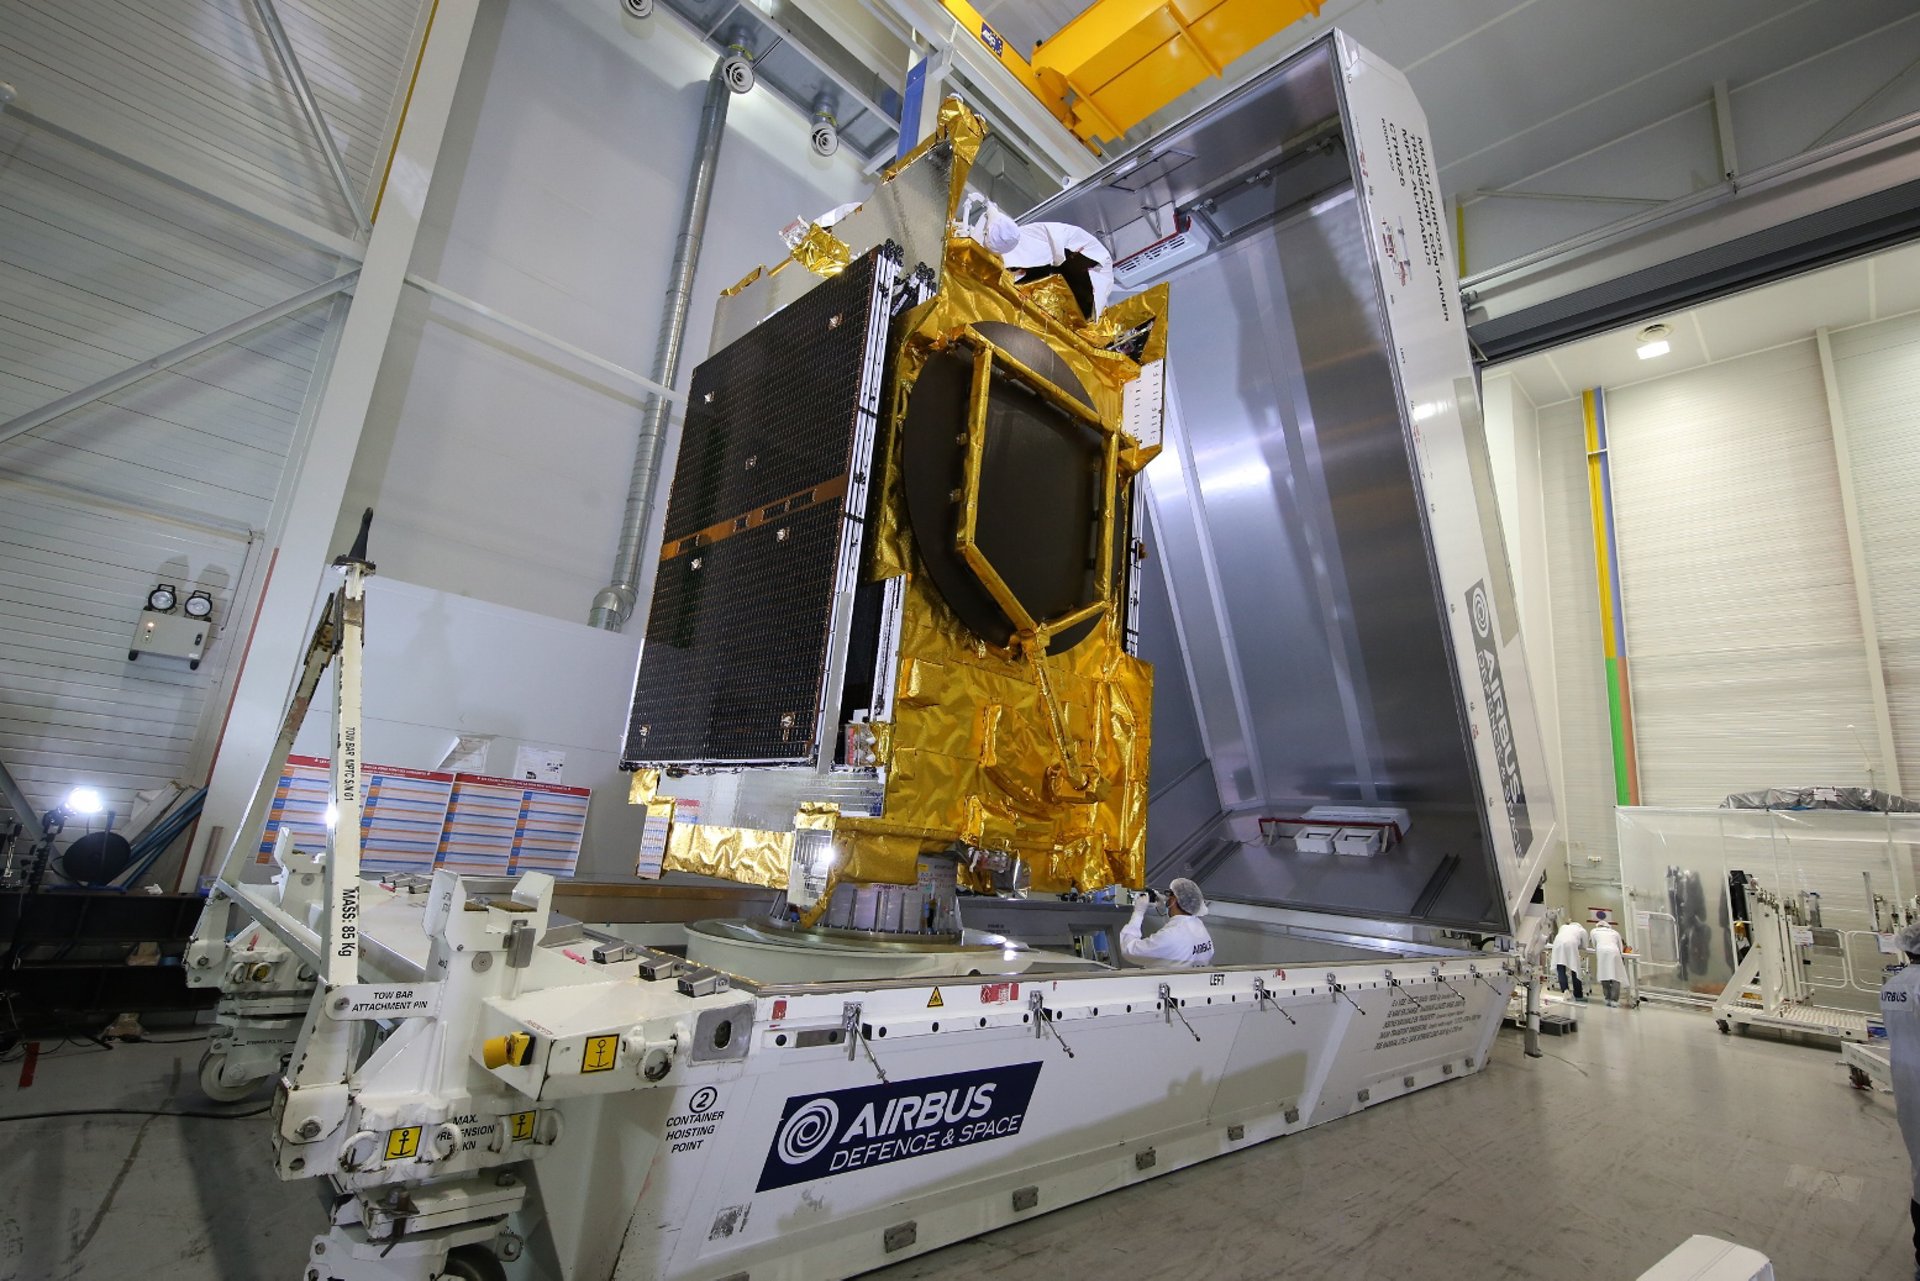 The ANASIS-II satellite is shipped from Airbus Defence and Space in Toulouse, France to be prepared for launch at Cape Canaveral